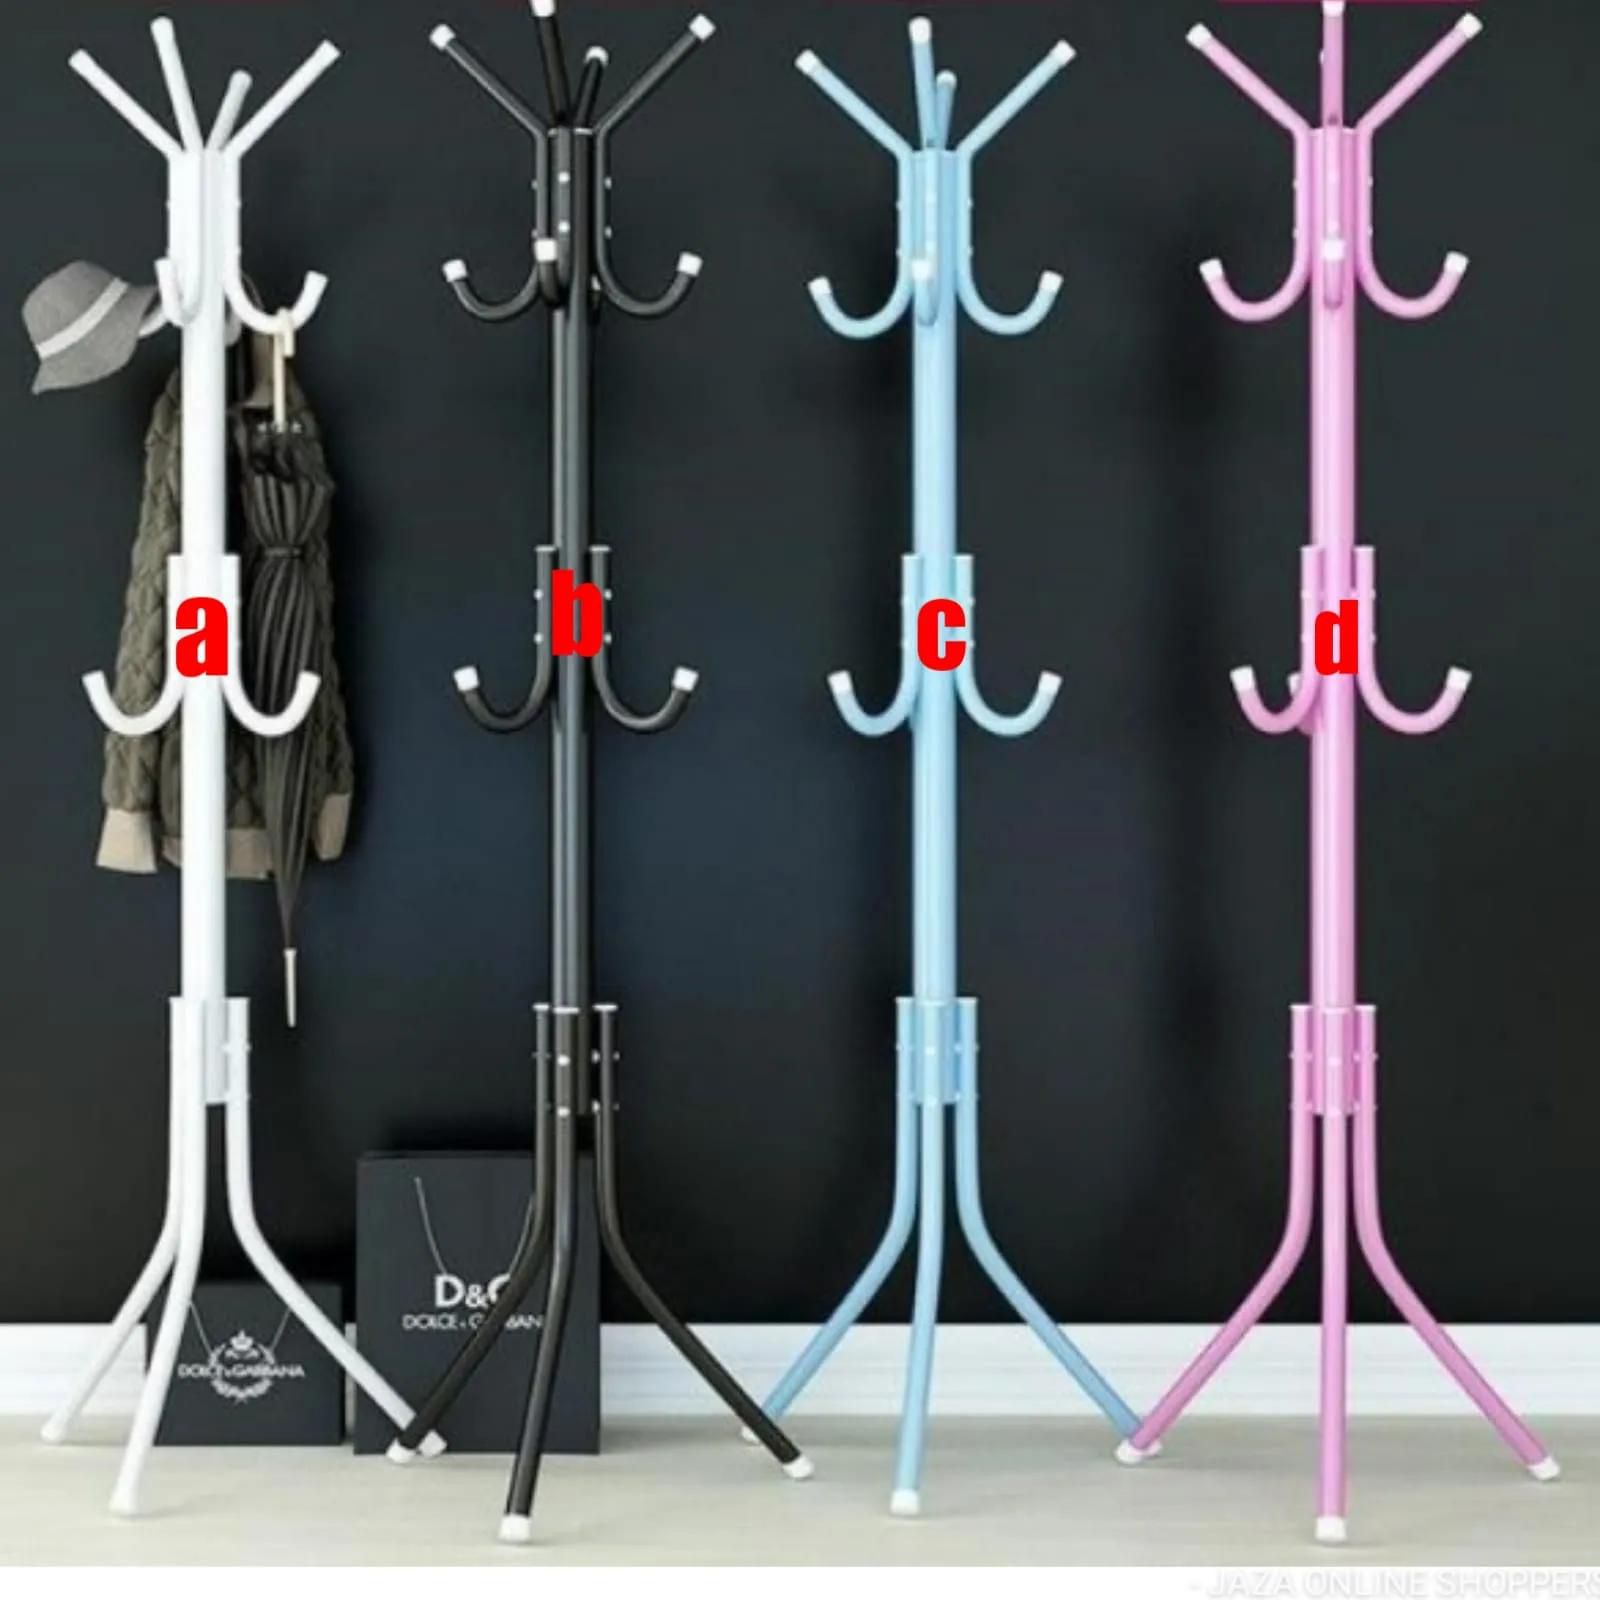 Multipurpose Handbags/Scurf/Hats/Coat Rack StandStrong and durable metallic build. Available in multiple colors Multifunctional rack, holds hats, coats,